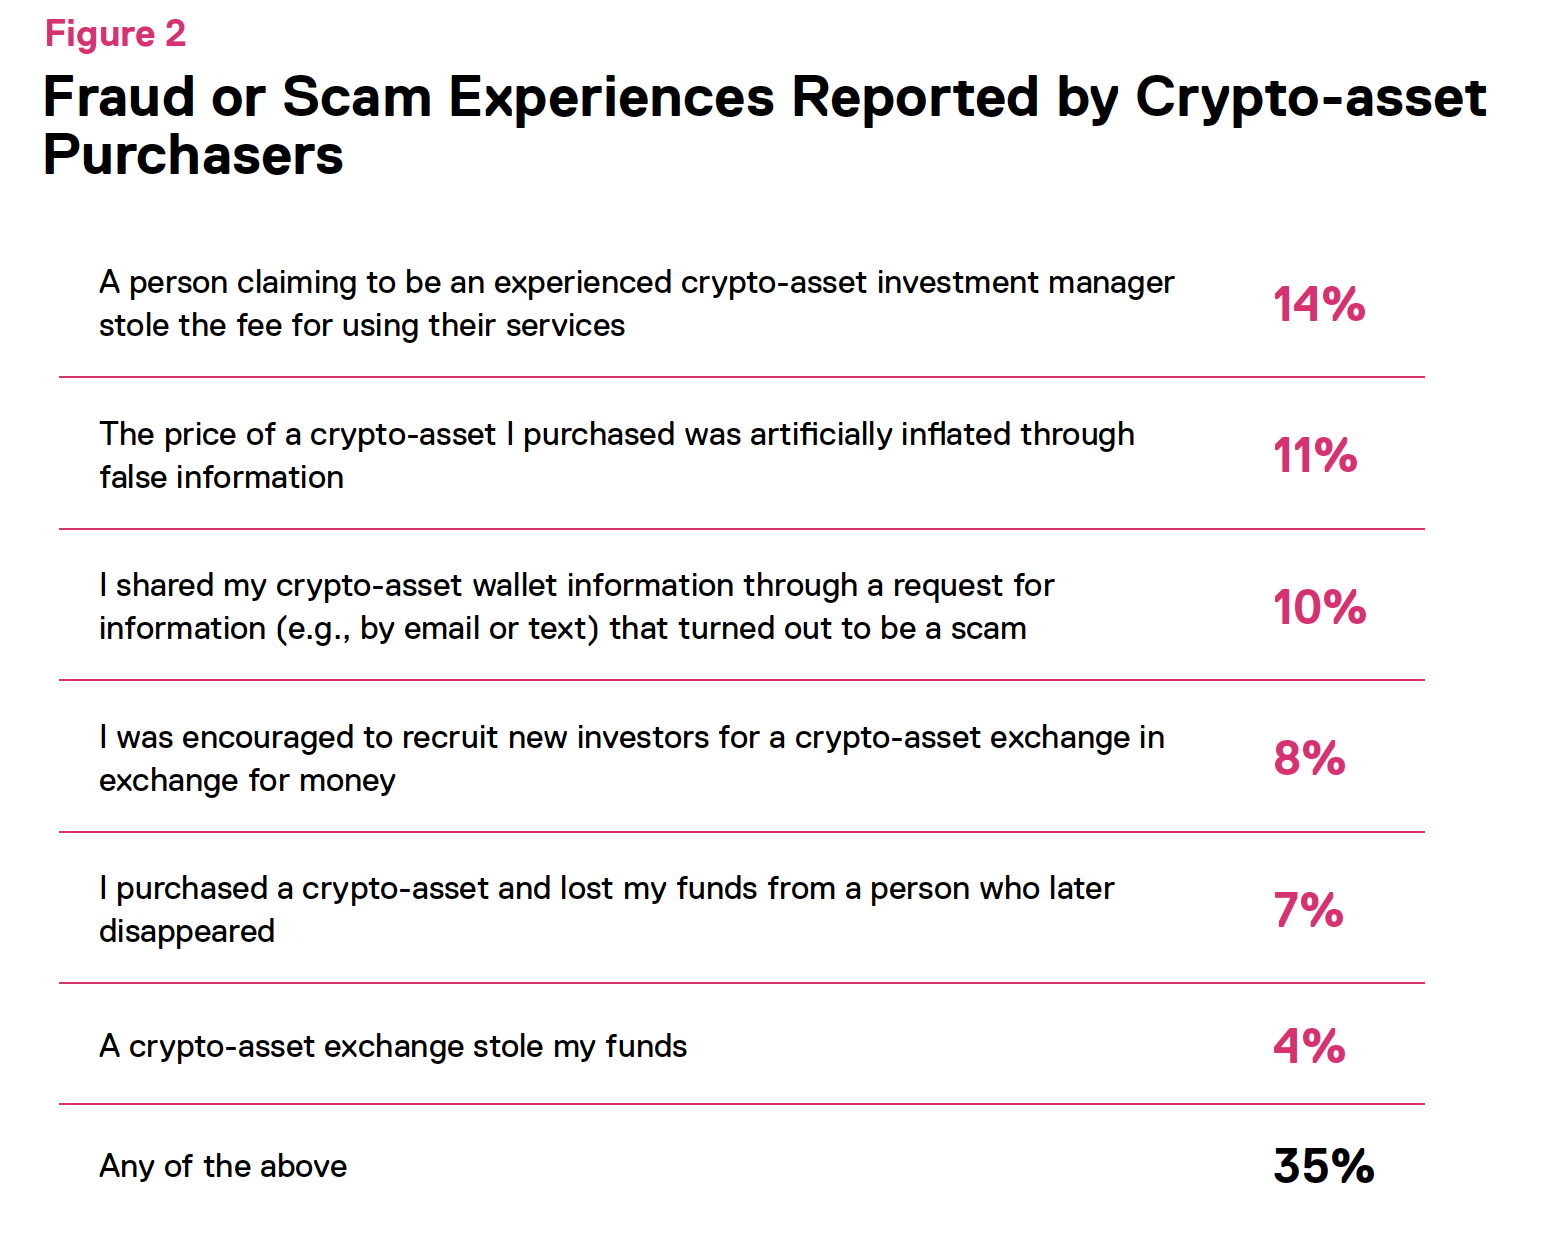 Fraud or scam experiences reported by crypto-asset owners